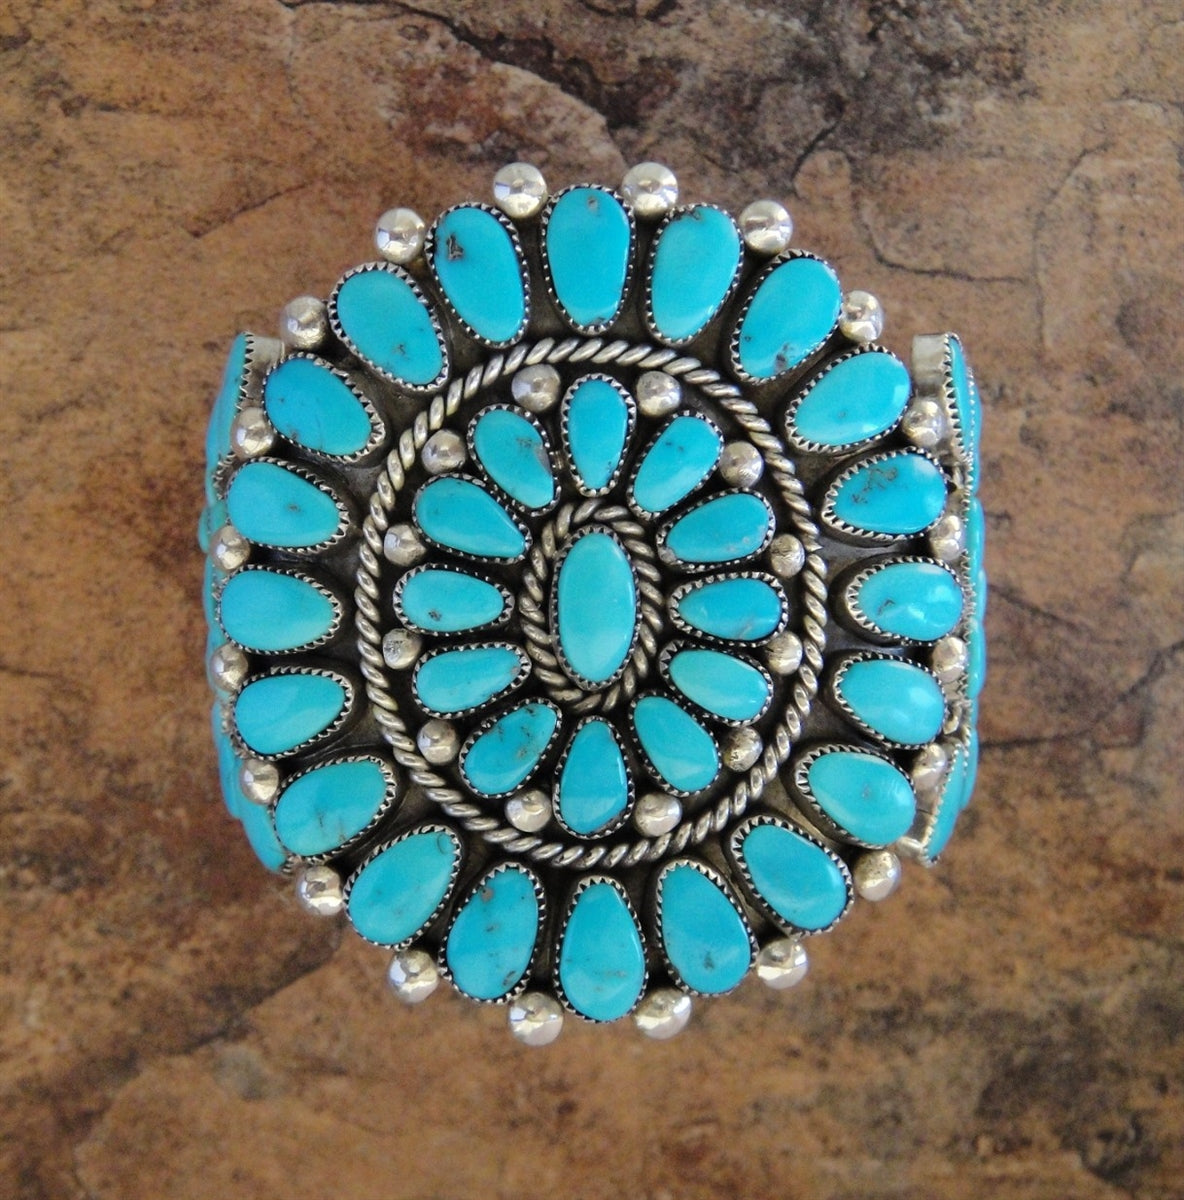 Turquoise Cluster Cuff Bracelet - Native American Jewelry by Zuni